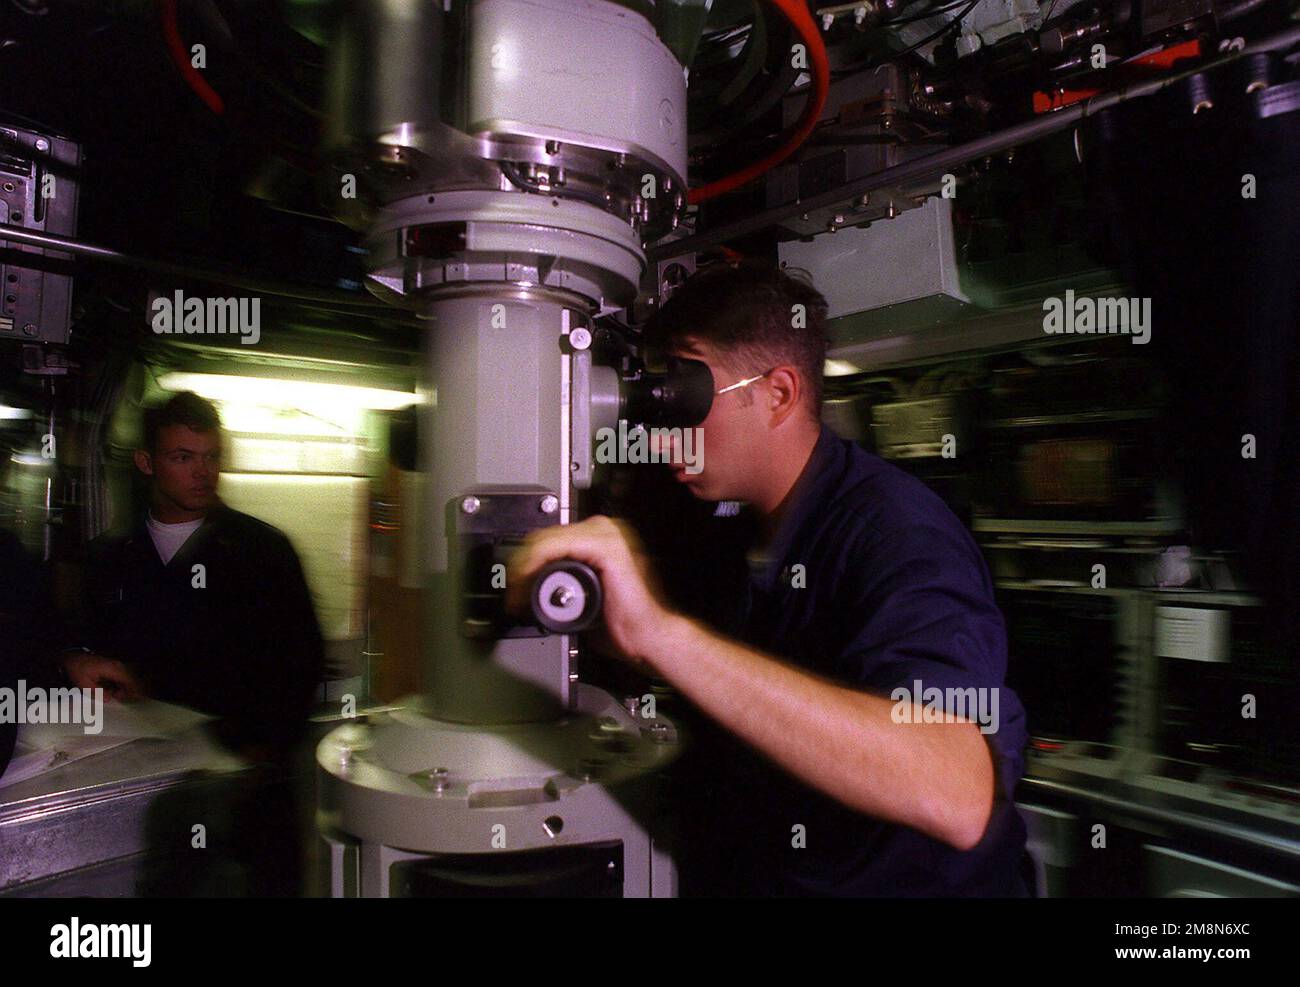 As the Los Angeles class attack submarine USS PASADENA (SSN 752)prepares to surface during RIMPAC '98, MM2 (SS) Tommy Wilkins peers through the periscope to ensure no surface contacts exist that would interfere with the submarine's surfacing. Subject Operation/Series: RIMPAC '98 Country: Pacific Ocean (POC) Stock Photo